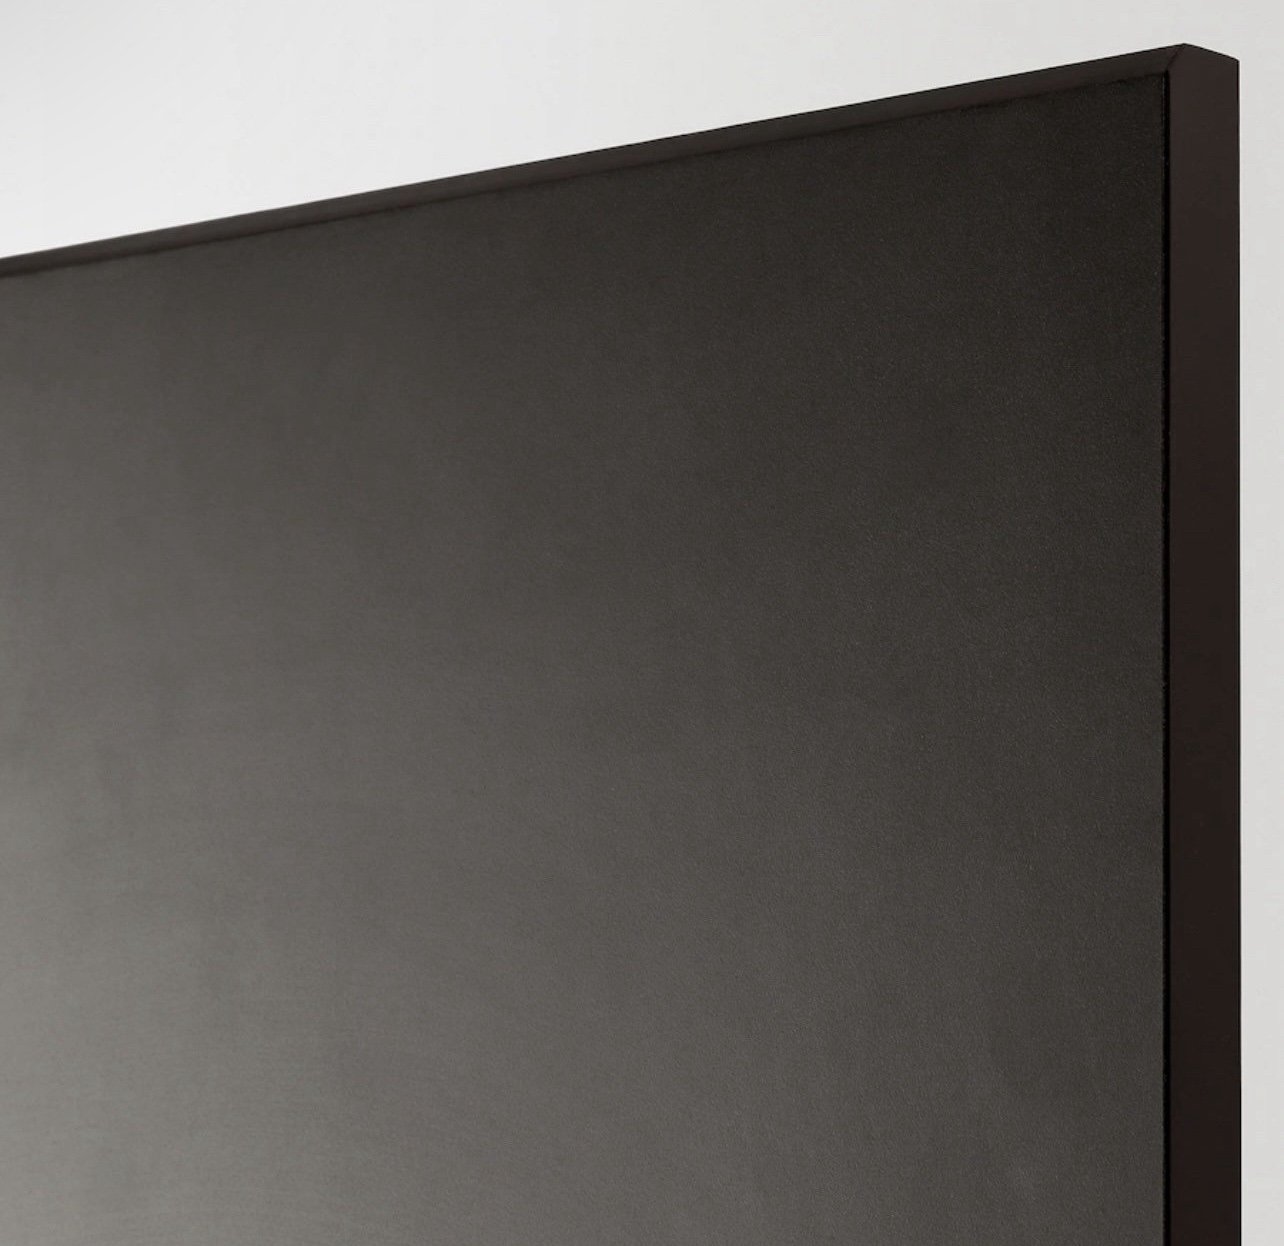 IKEA KUNGSBACKA 15x41 anthracite 203.379.11 cover panel